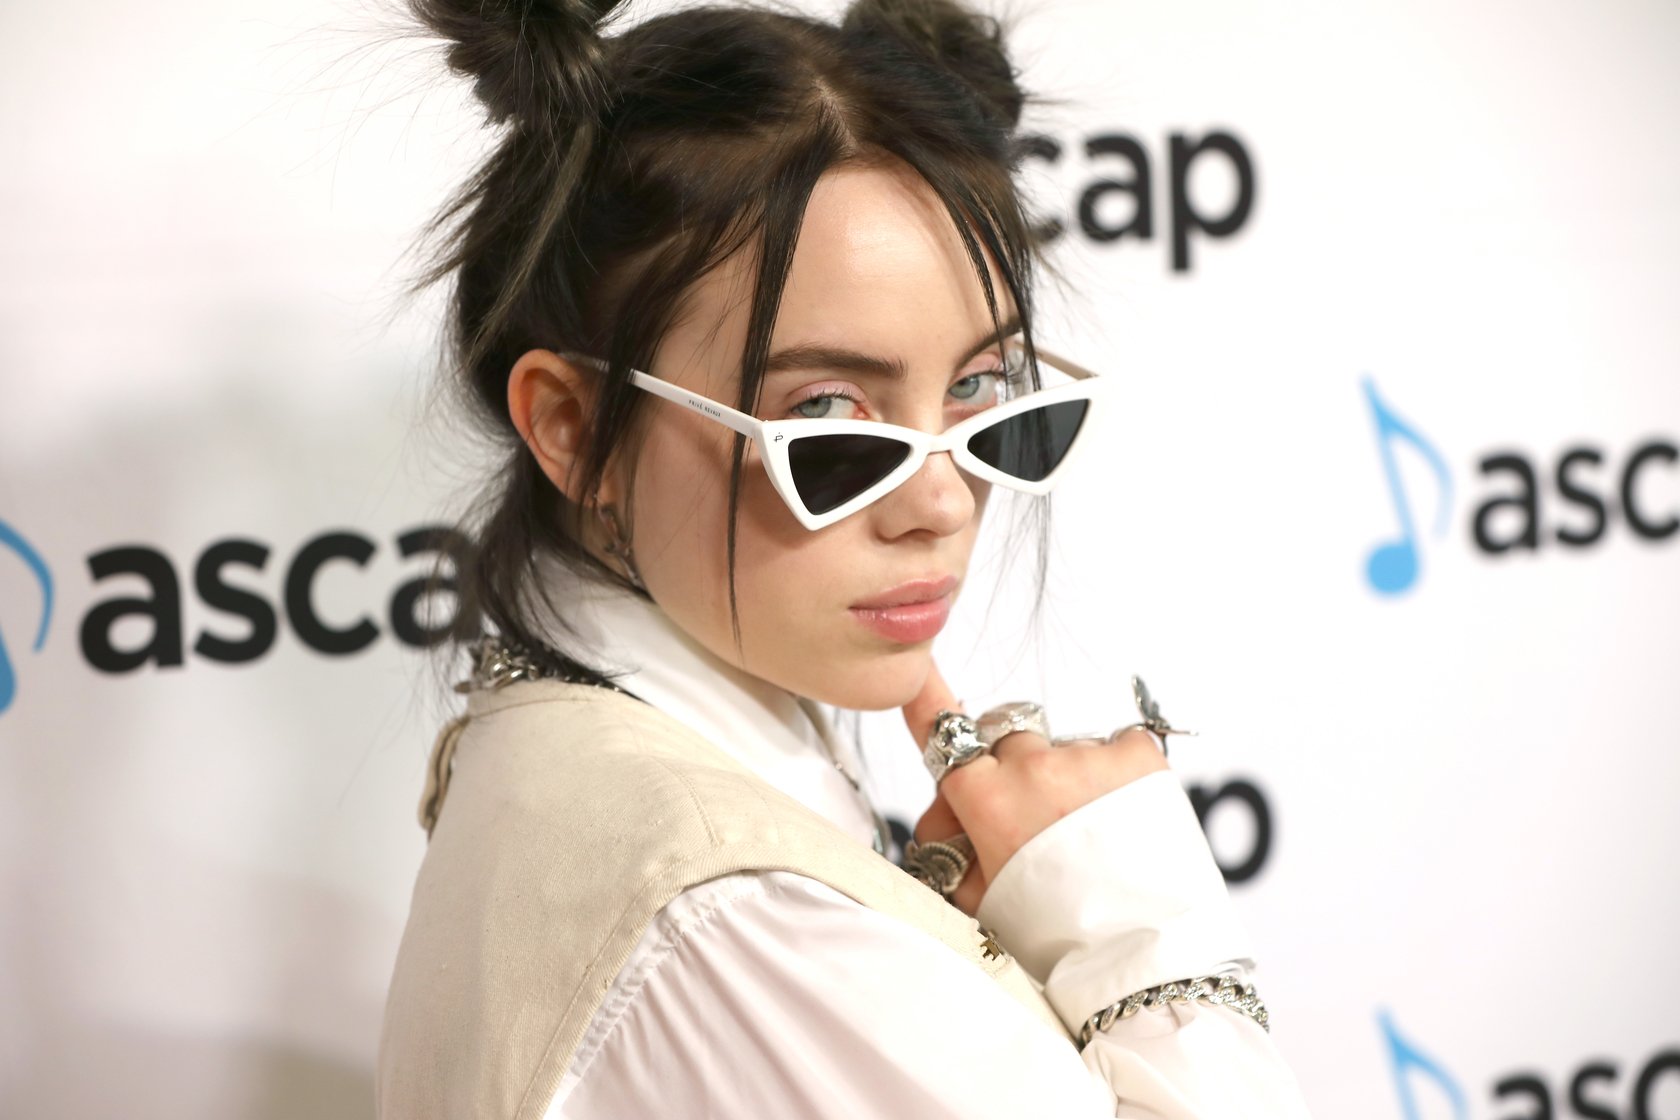  Billie Eilish attends the ASCAP 2019 Pop Music Awards at The Beverly Hilton Hotel on May 16, 2019 | Photo: GettyImages